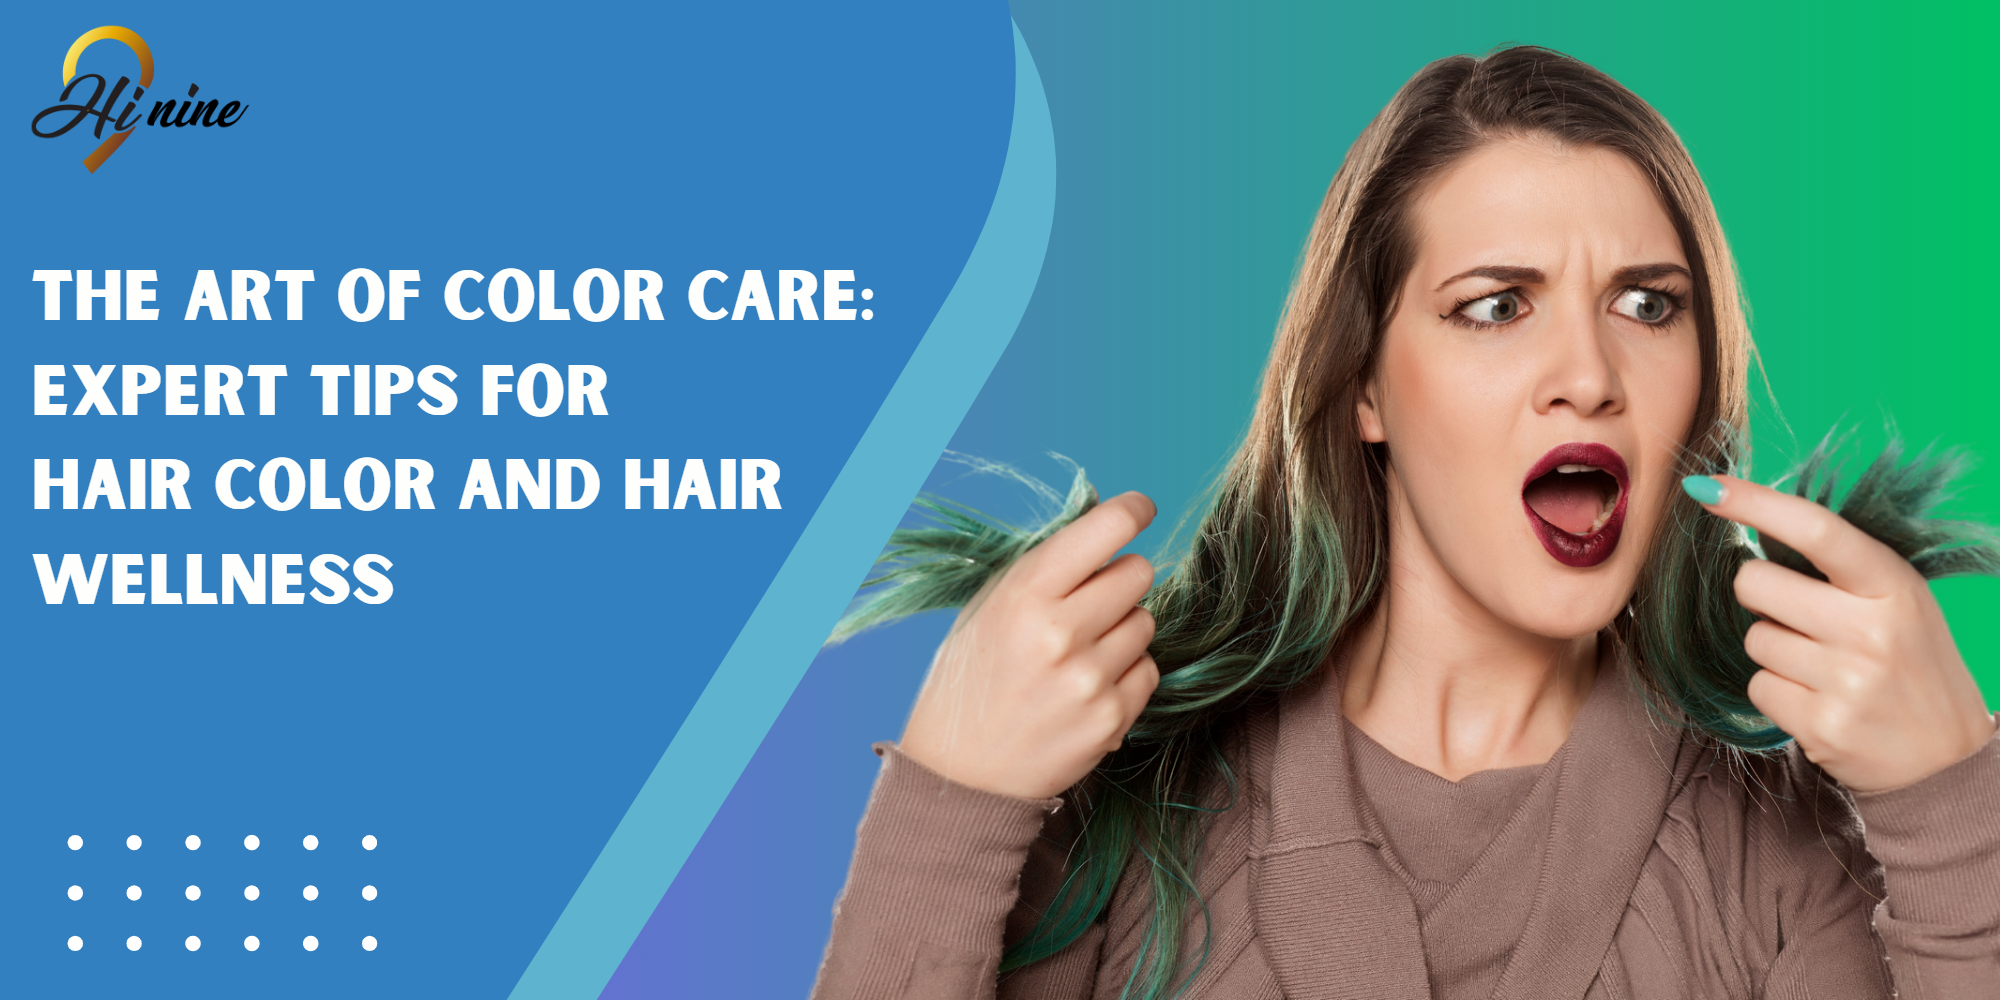 The Art of Color Care: Expert Tips for Prolonging Hair Color and Achieving Hair Wellness